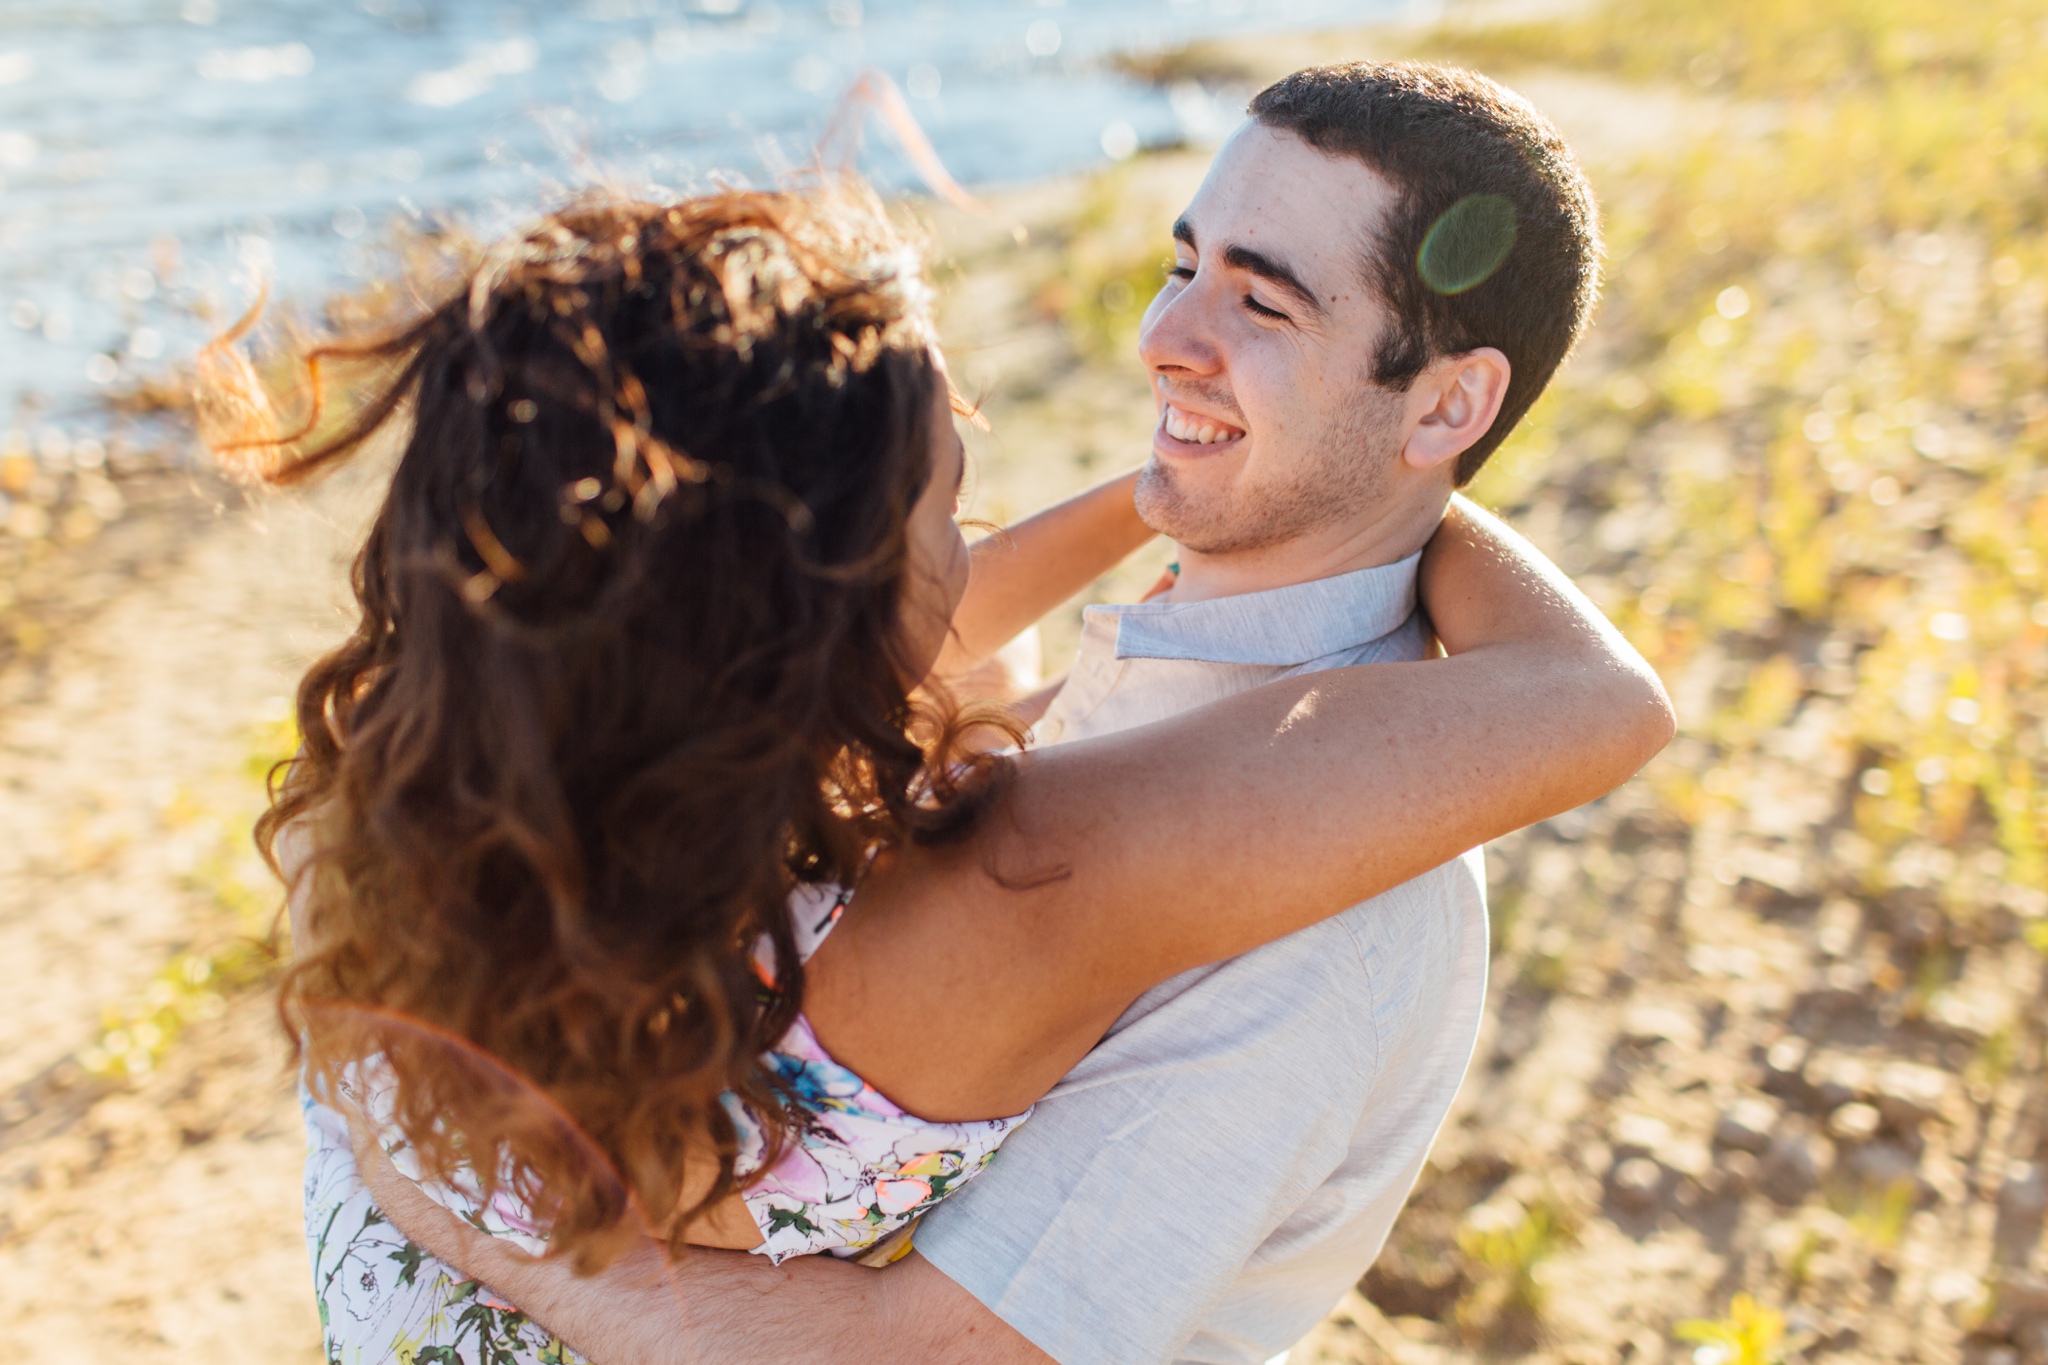 thedelauras_ostaraphotography_laketahoeengagement_laketahoeweddingphotograph_laketahoe_photographer_024